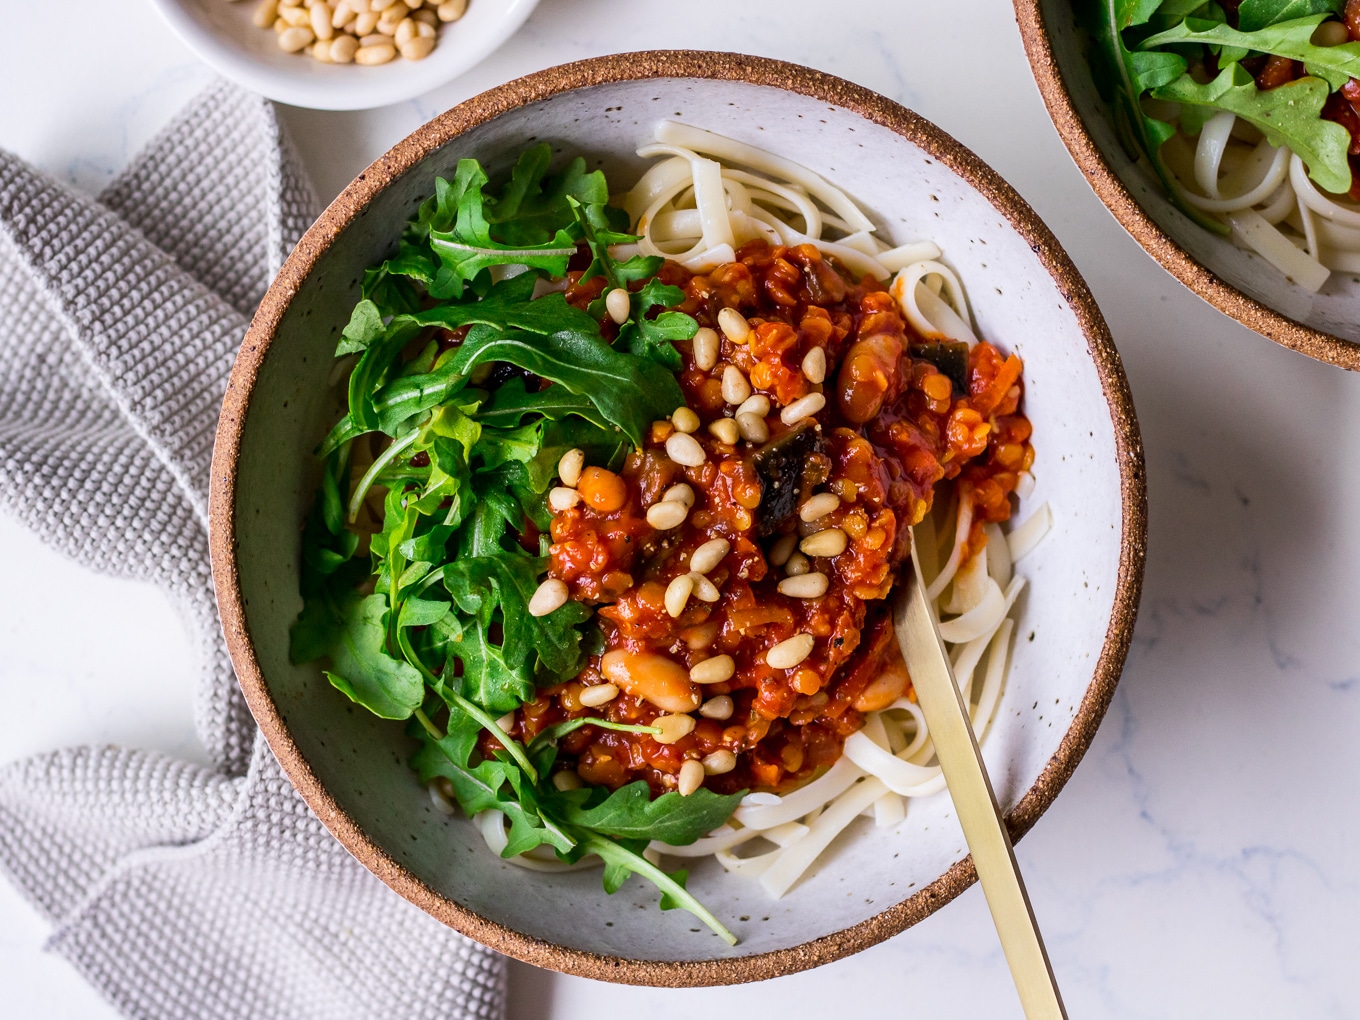 Vegan lentil bolognese sauce topped with pine nuts